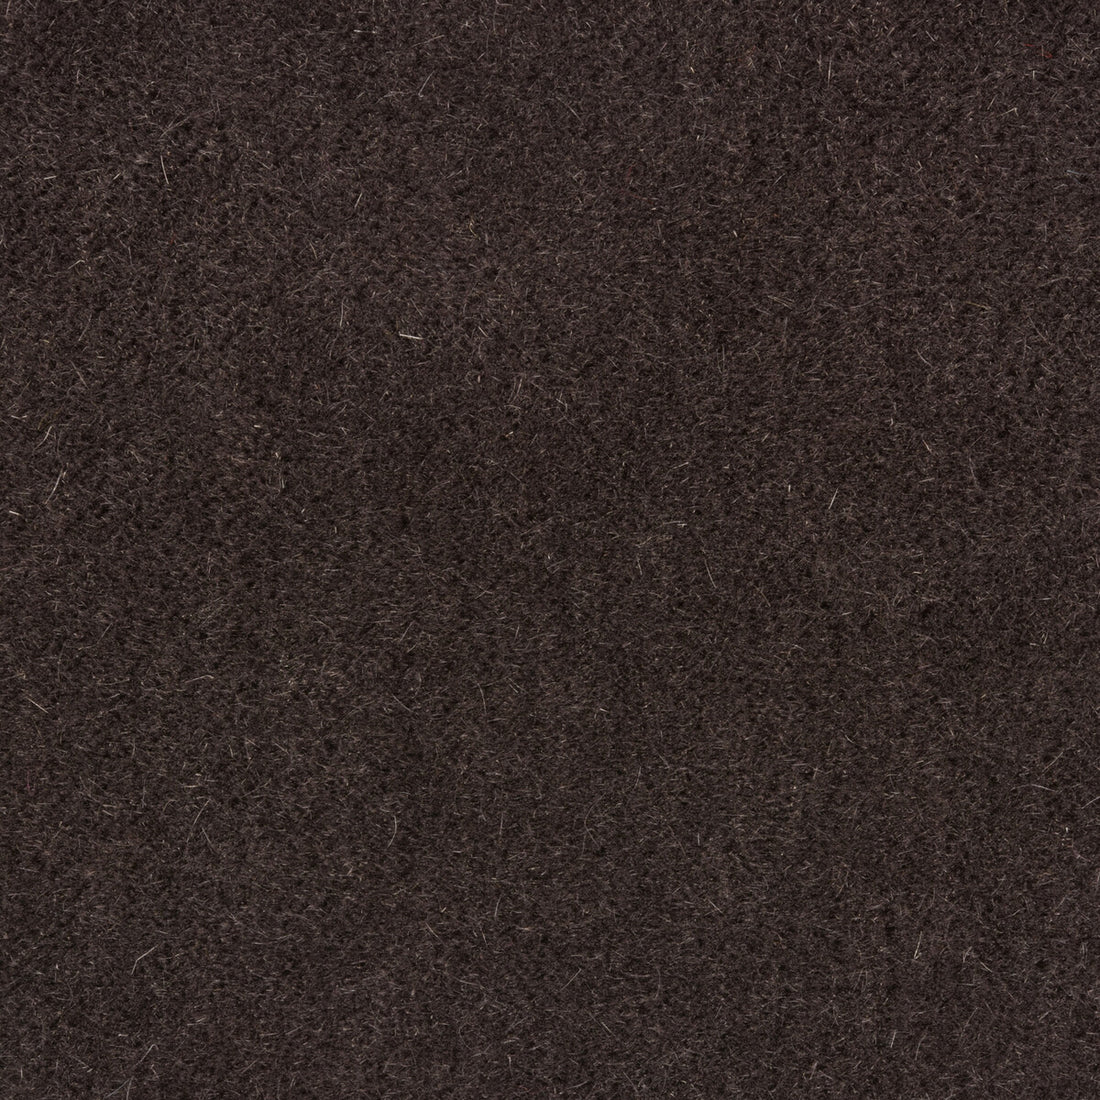 Windsor Mohair fabric in espresso color - pattern 34258.68.0 - by Kravet Couture